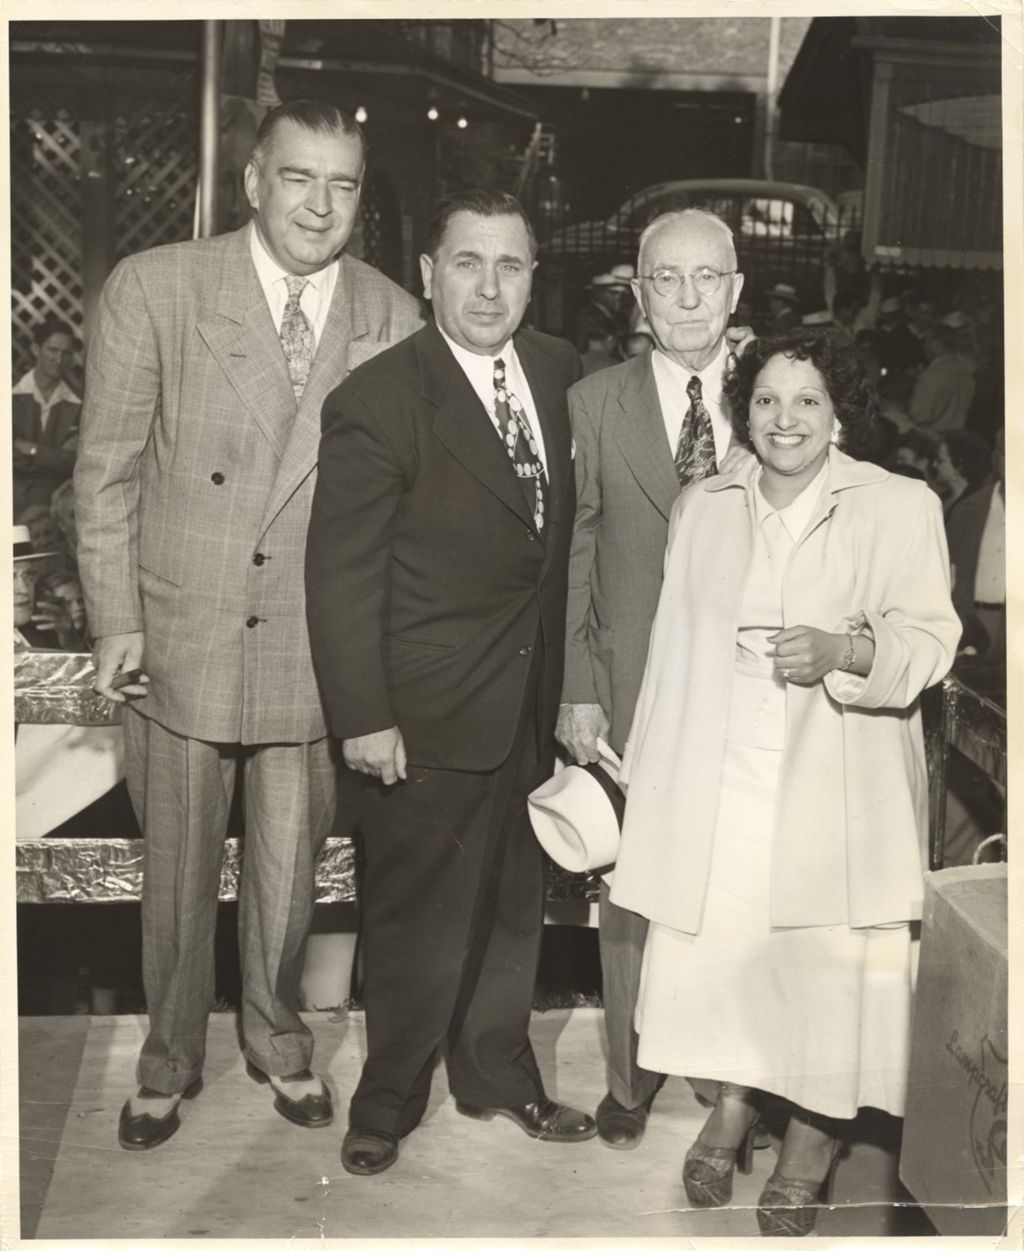 Richard J. Daley with others at an outdoor event